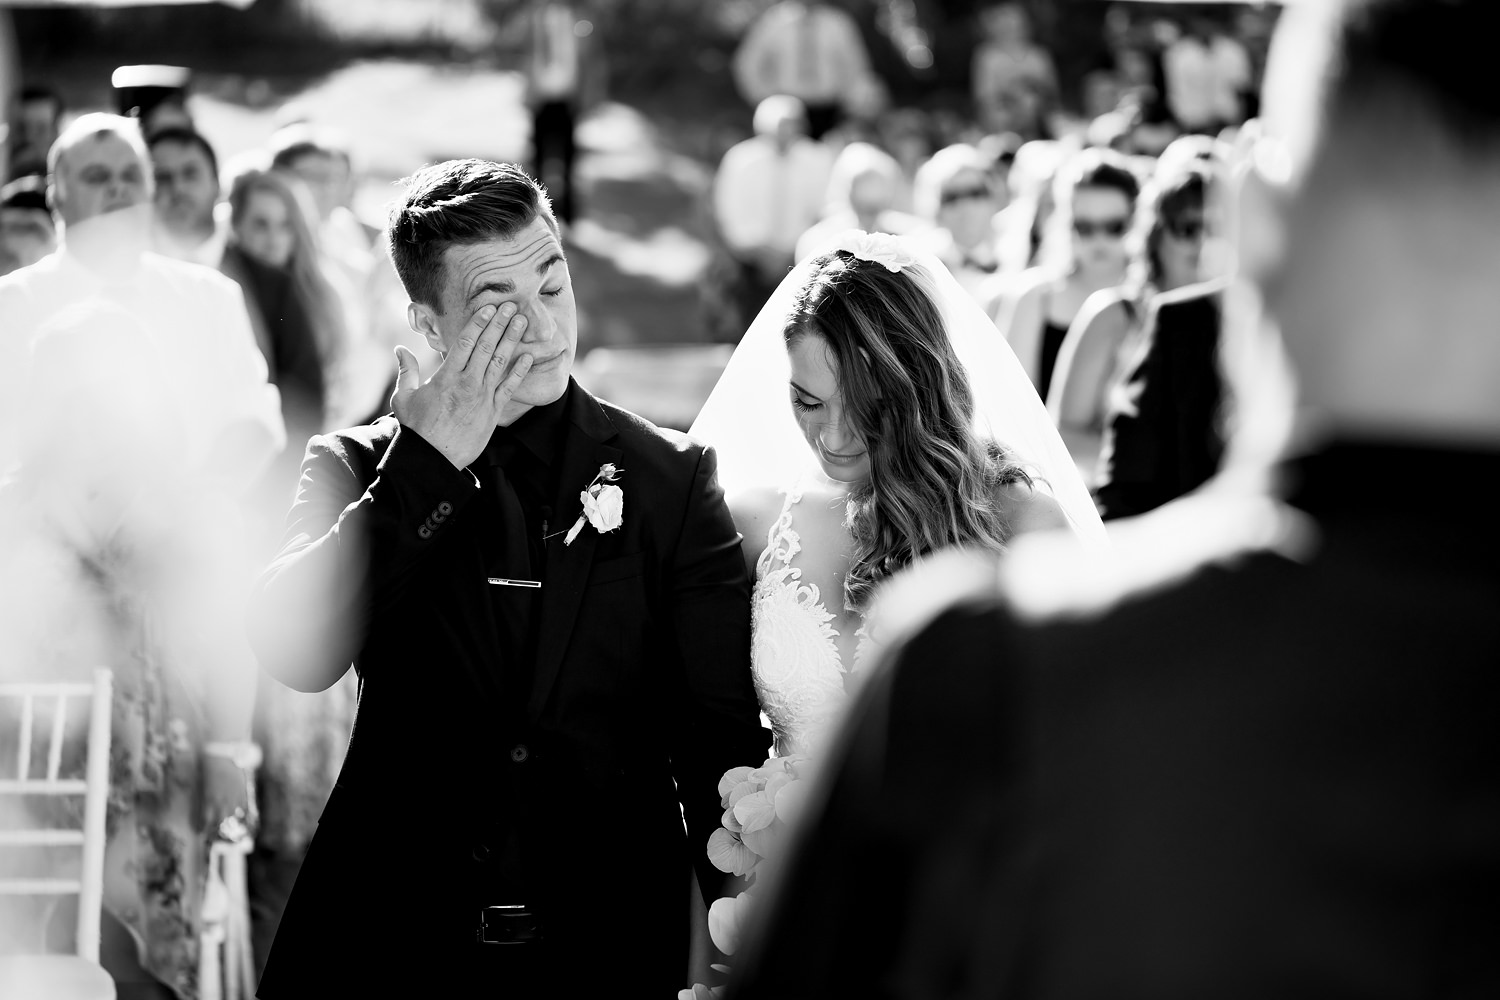 The groom, dressed in all black, wipes a tear away during a ceremony prayer. Captured by wedding photographer in South Africa, Niki M Photography